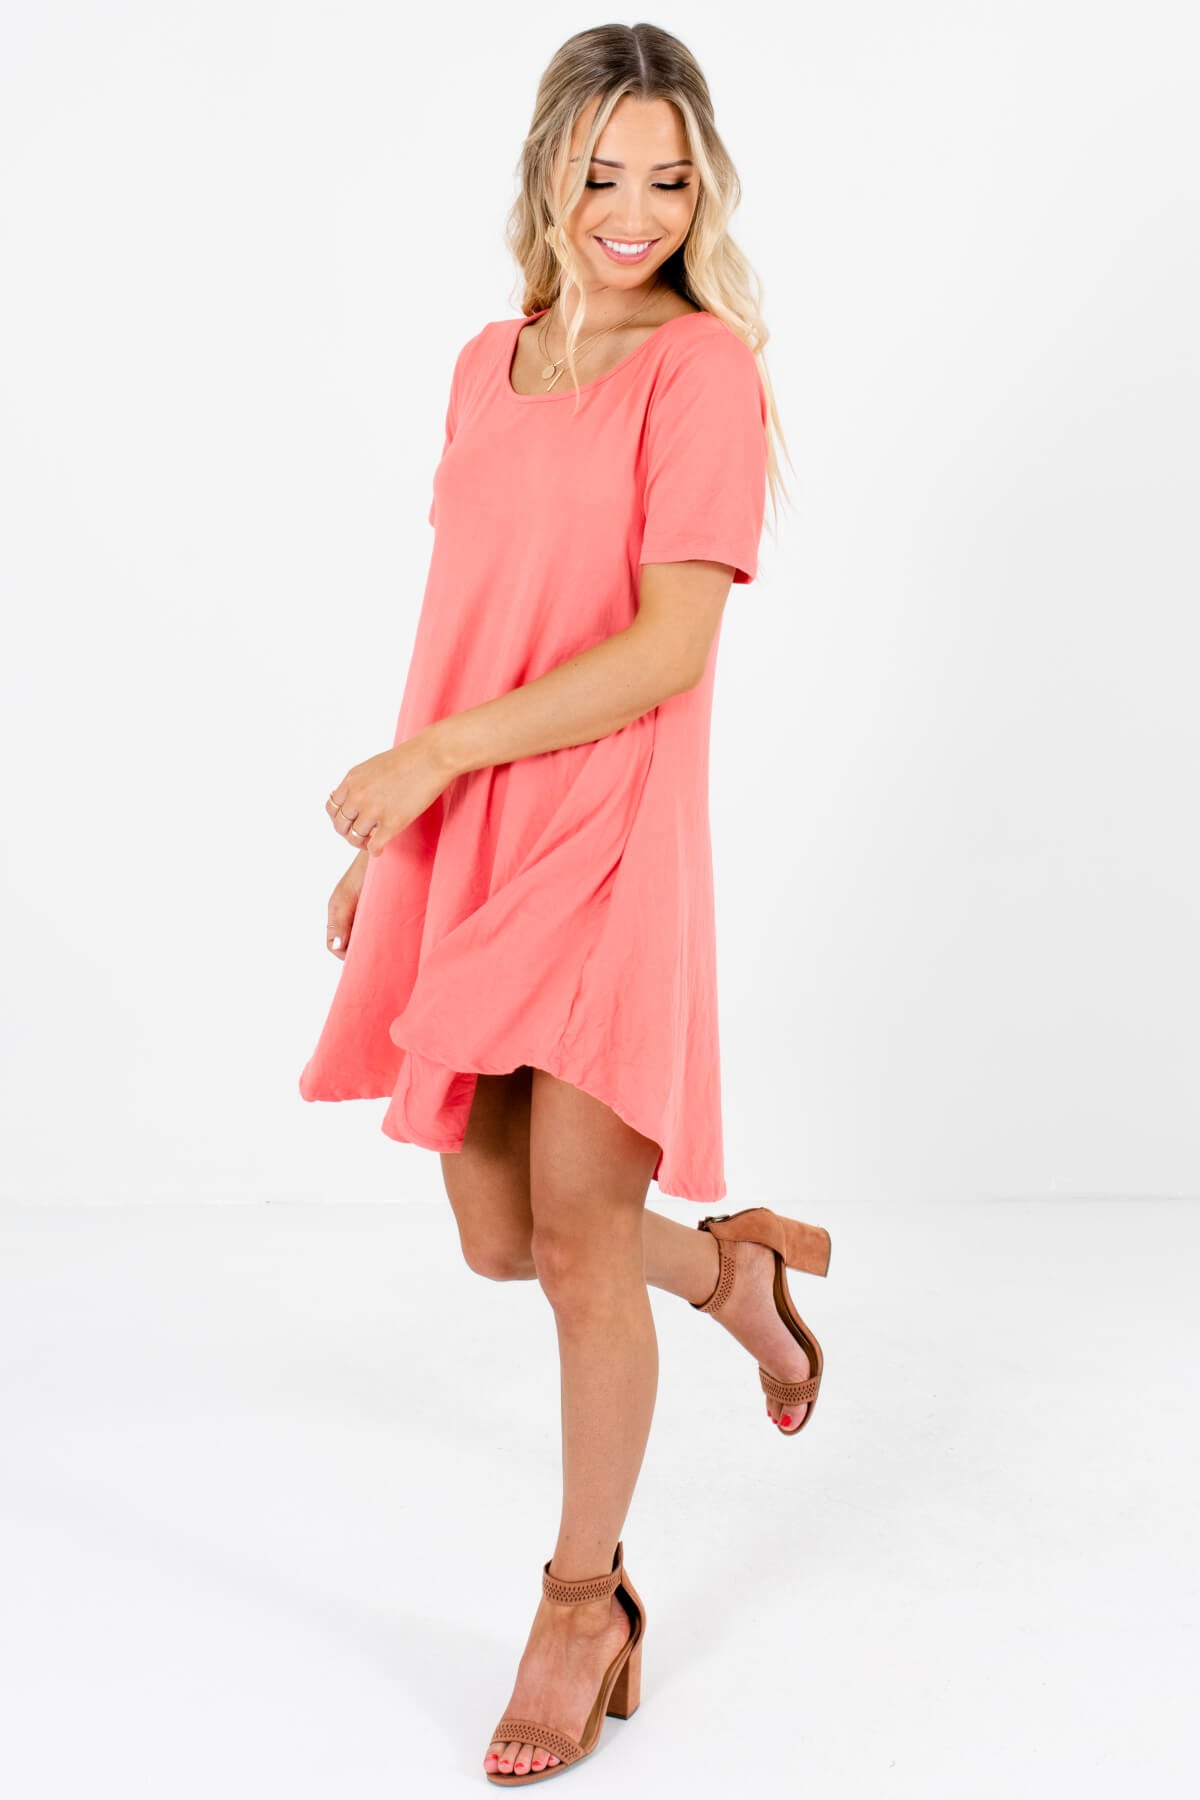 Coral Pink Cute Soft Stretchy Boutique Mini Dresses with Pockets